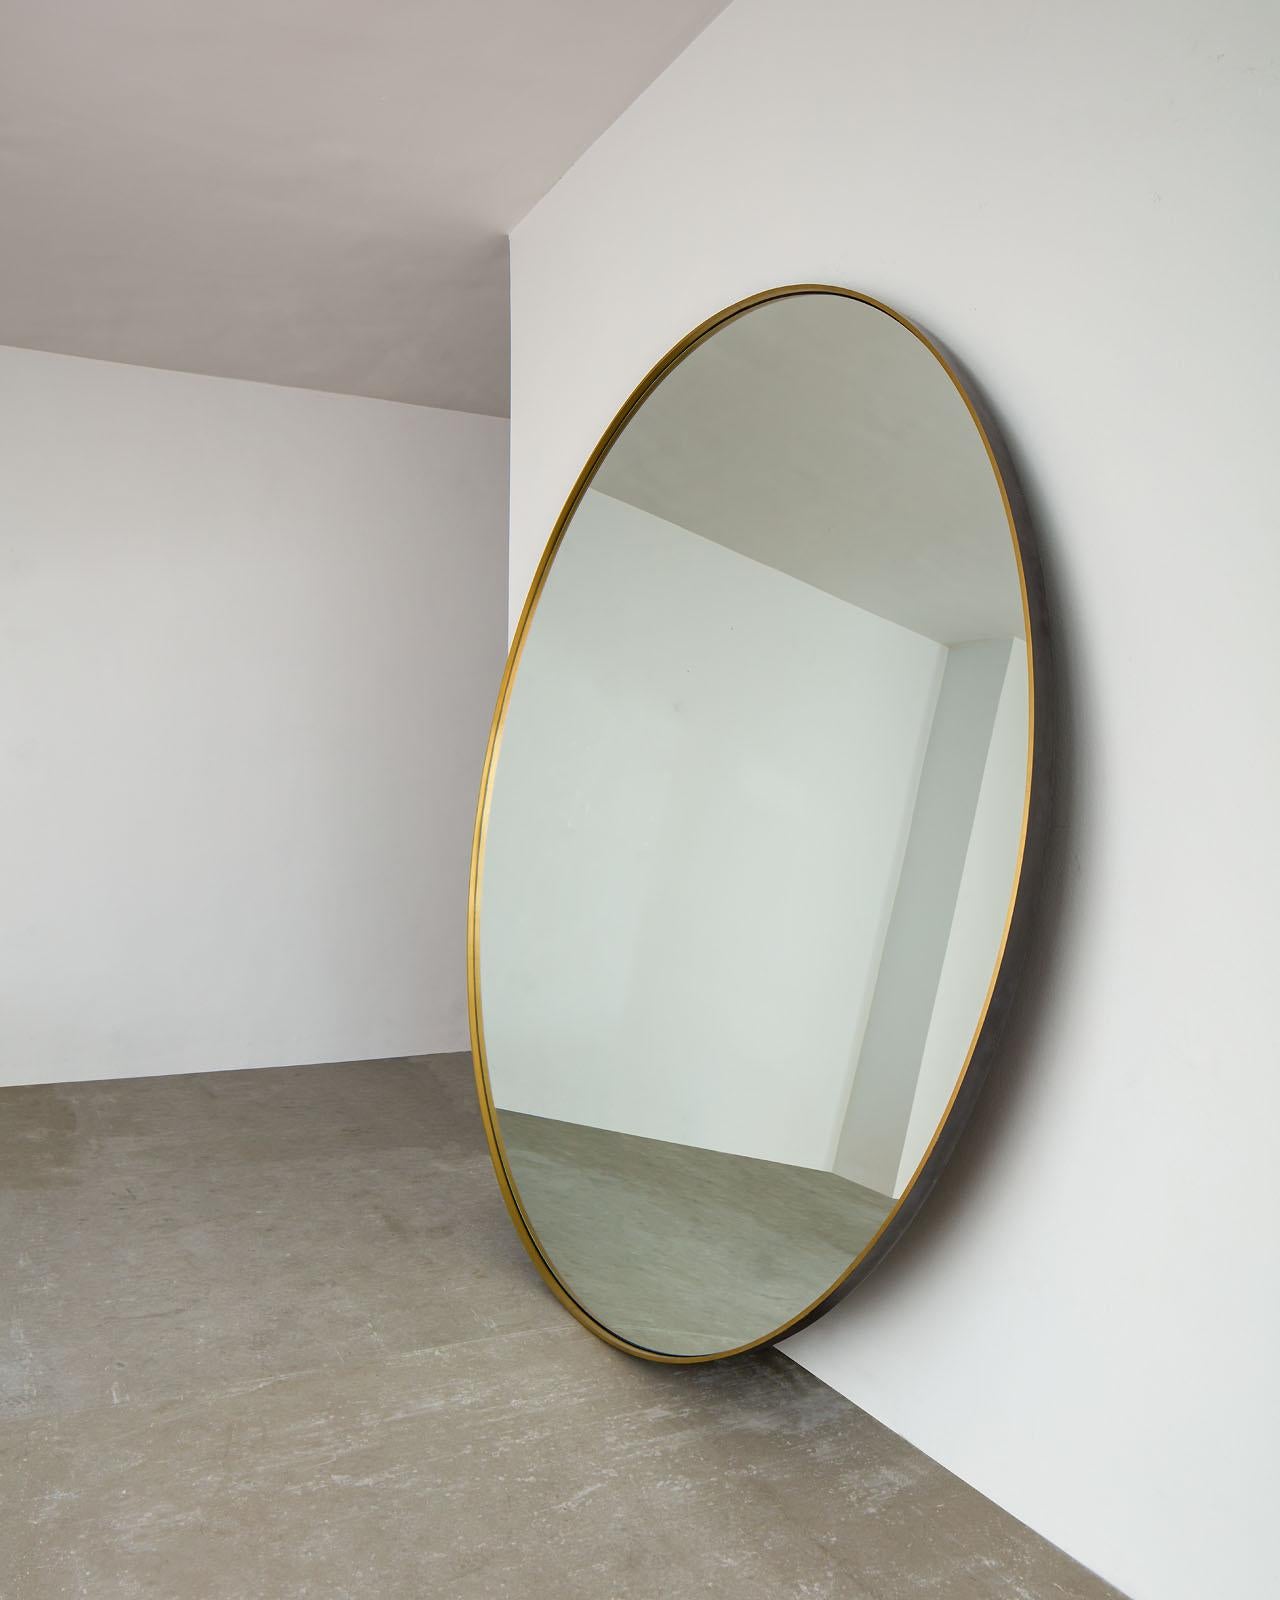 Decorate your workout space with this oversized leaning mirror. The circular shapes and scale are designed to fit the view of your entire body with extended arms and legs. The mirror can also help create your own sanctuary of peace for meditation or